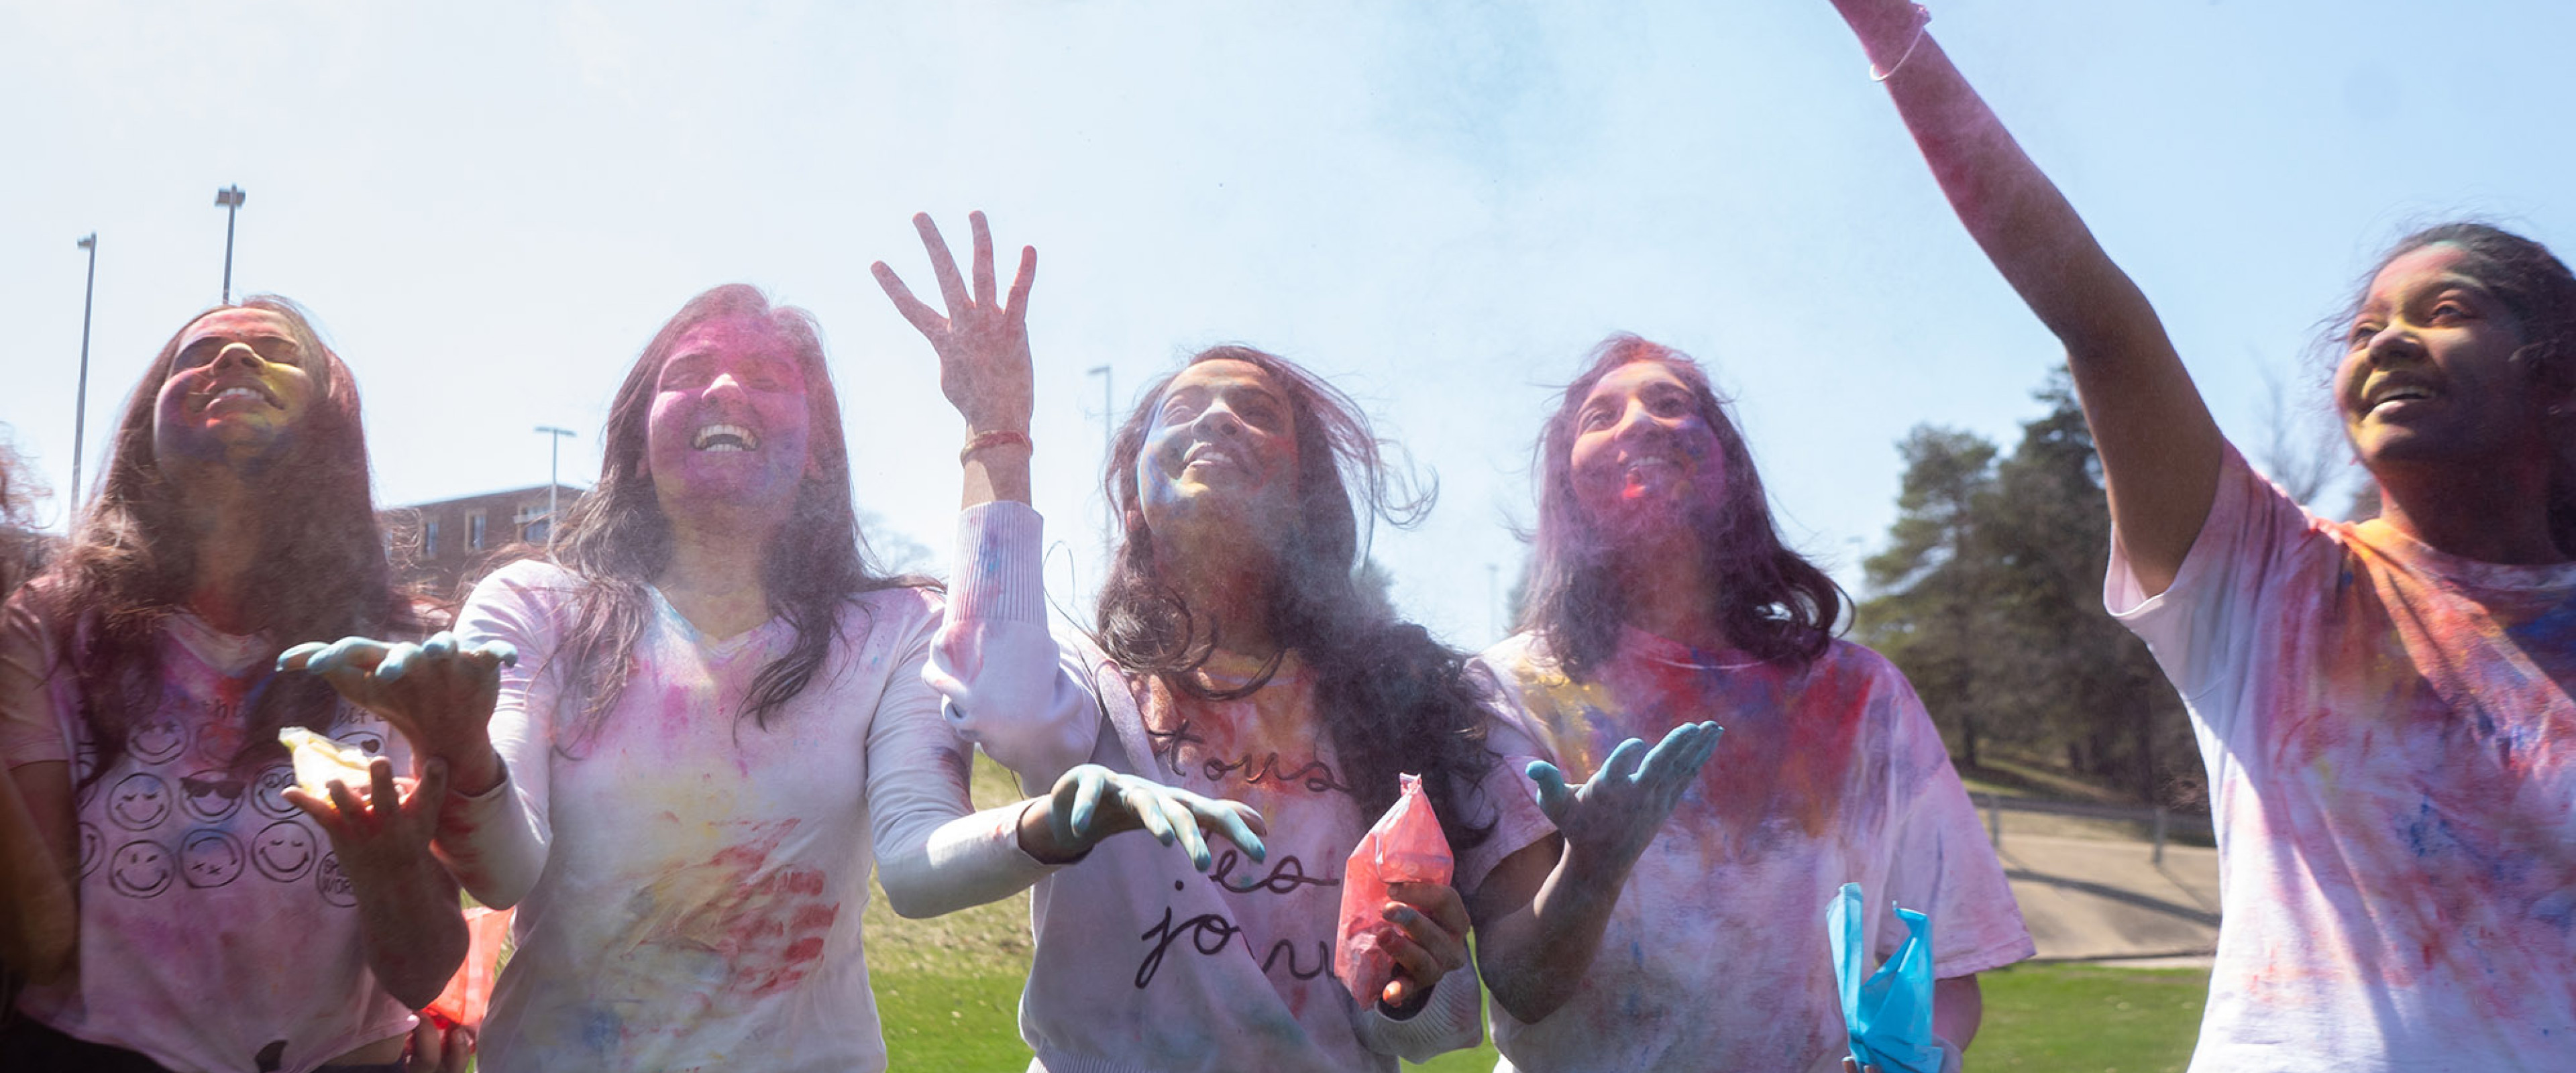 Western’s Indian Student Association RSO holds Holi Festival in WMU’s Intramural Sports Soccer Fields. This celebration welcomes the beginning of Spring as Winter comes to a close with dancing and throwing colorful powders at one another.